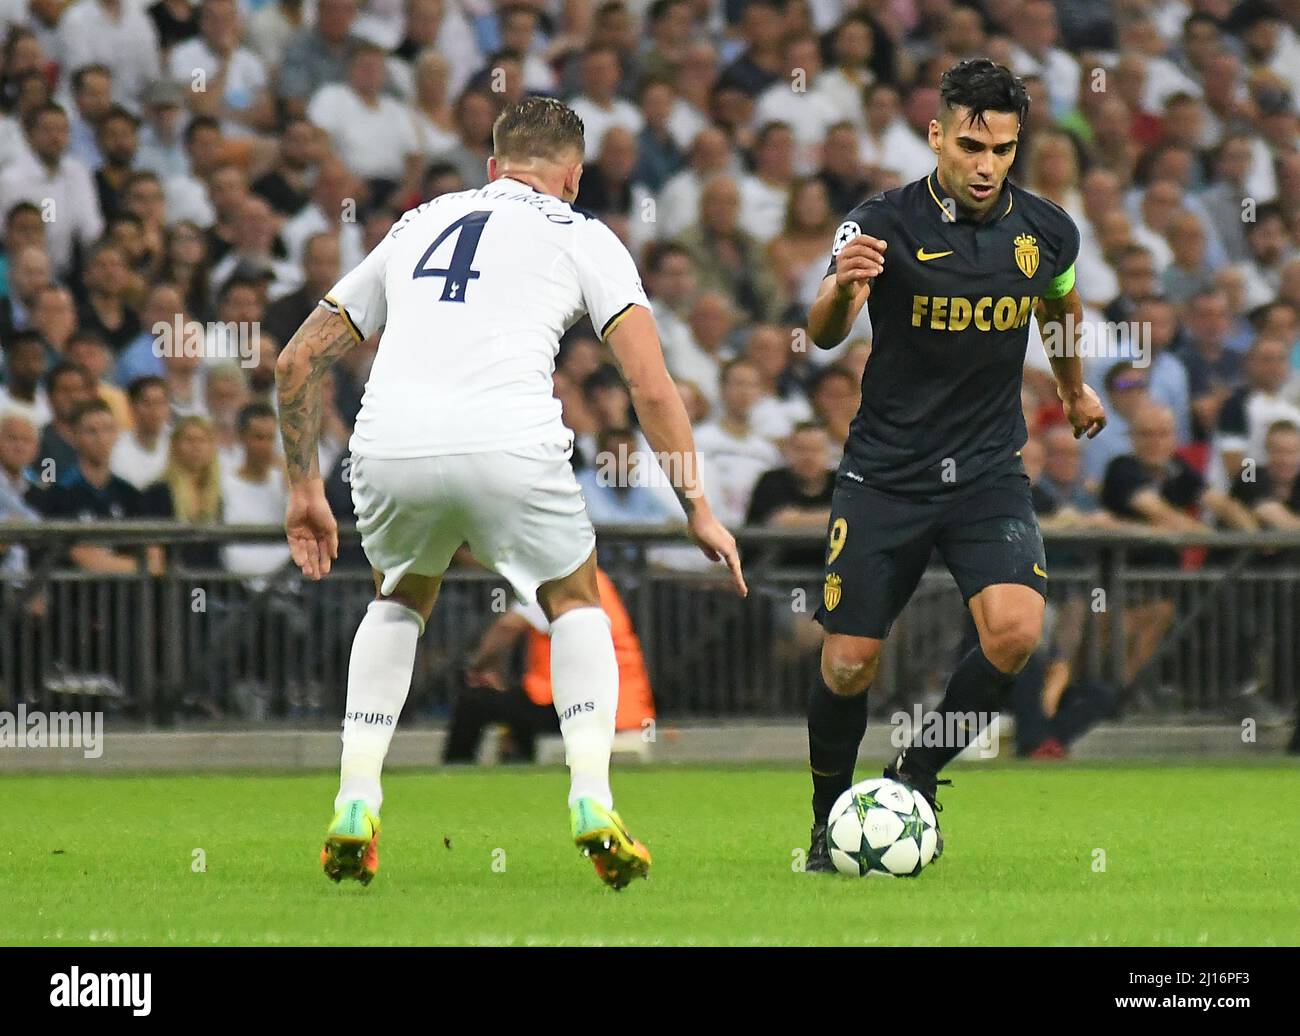 MANCHESTER, ENGLAND - SEPTEMBER 14, 2016: Radamel Falcao (R) of Monaco pictured in action during the UEFA Champions League Group E game between Tottenham Hotspur and AS Monaco at Wembley Stadium. Copyright: Cosmin Iftode/Picstaff Stock Photo